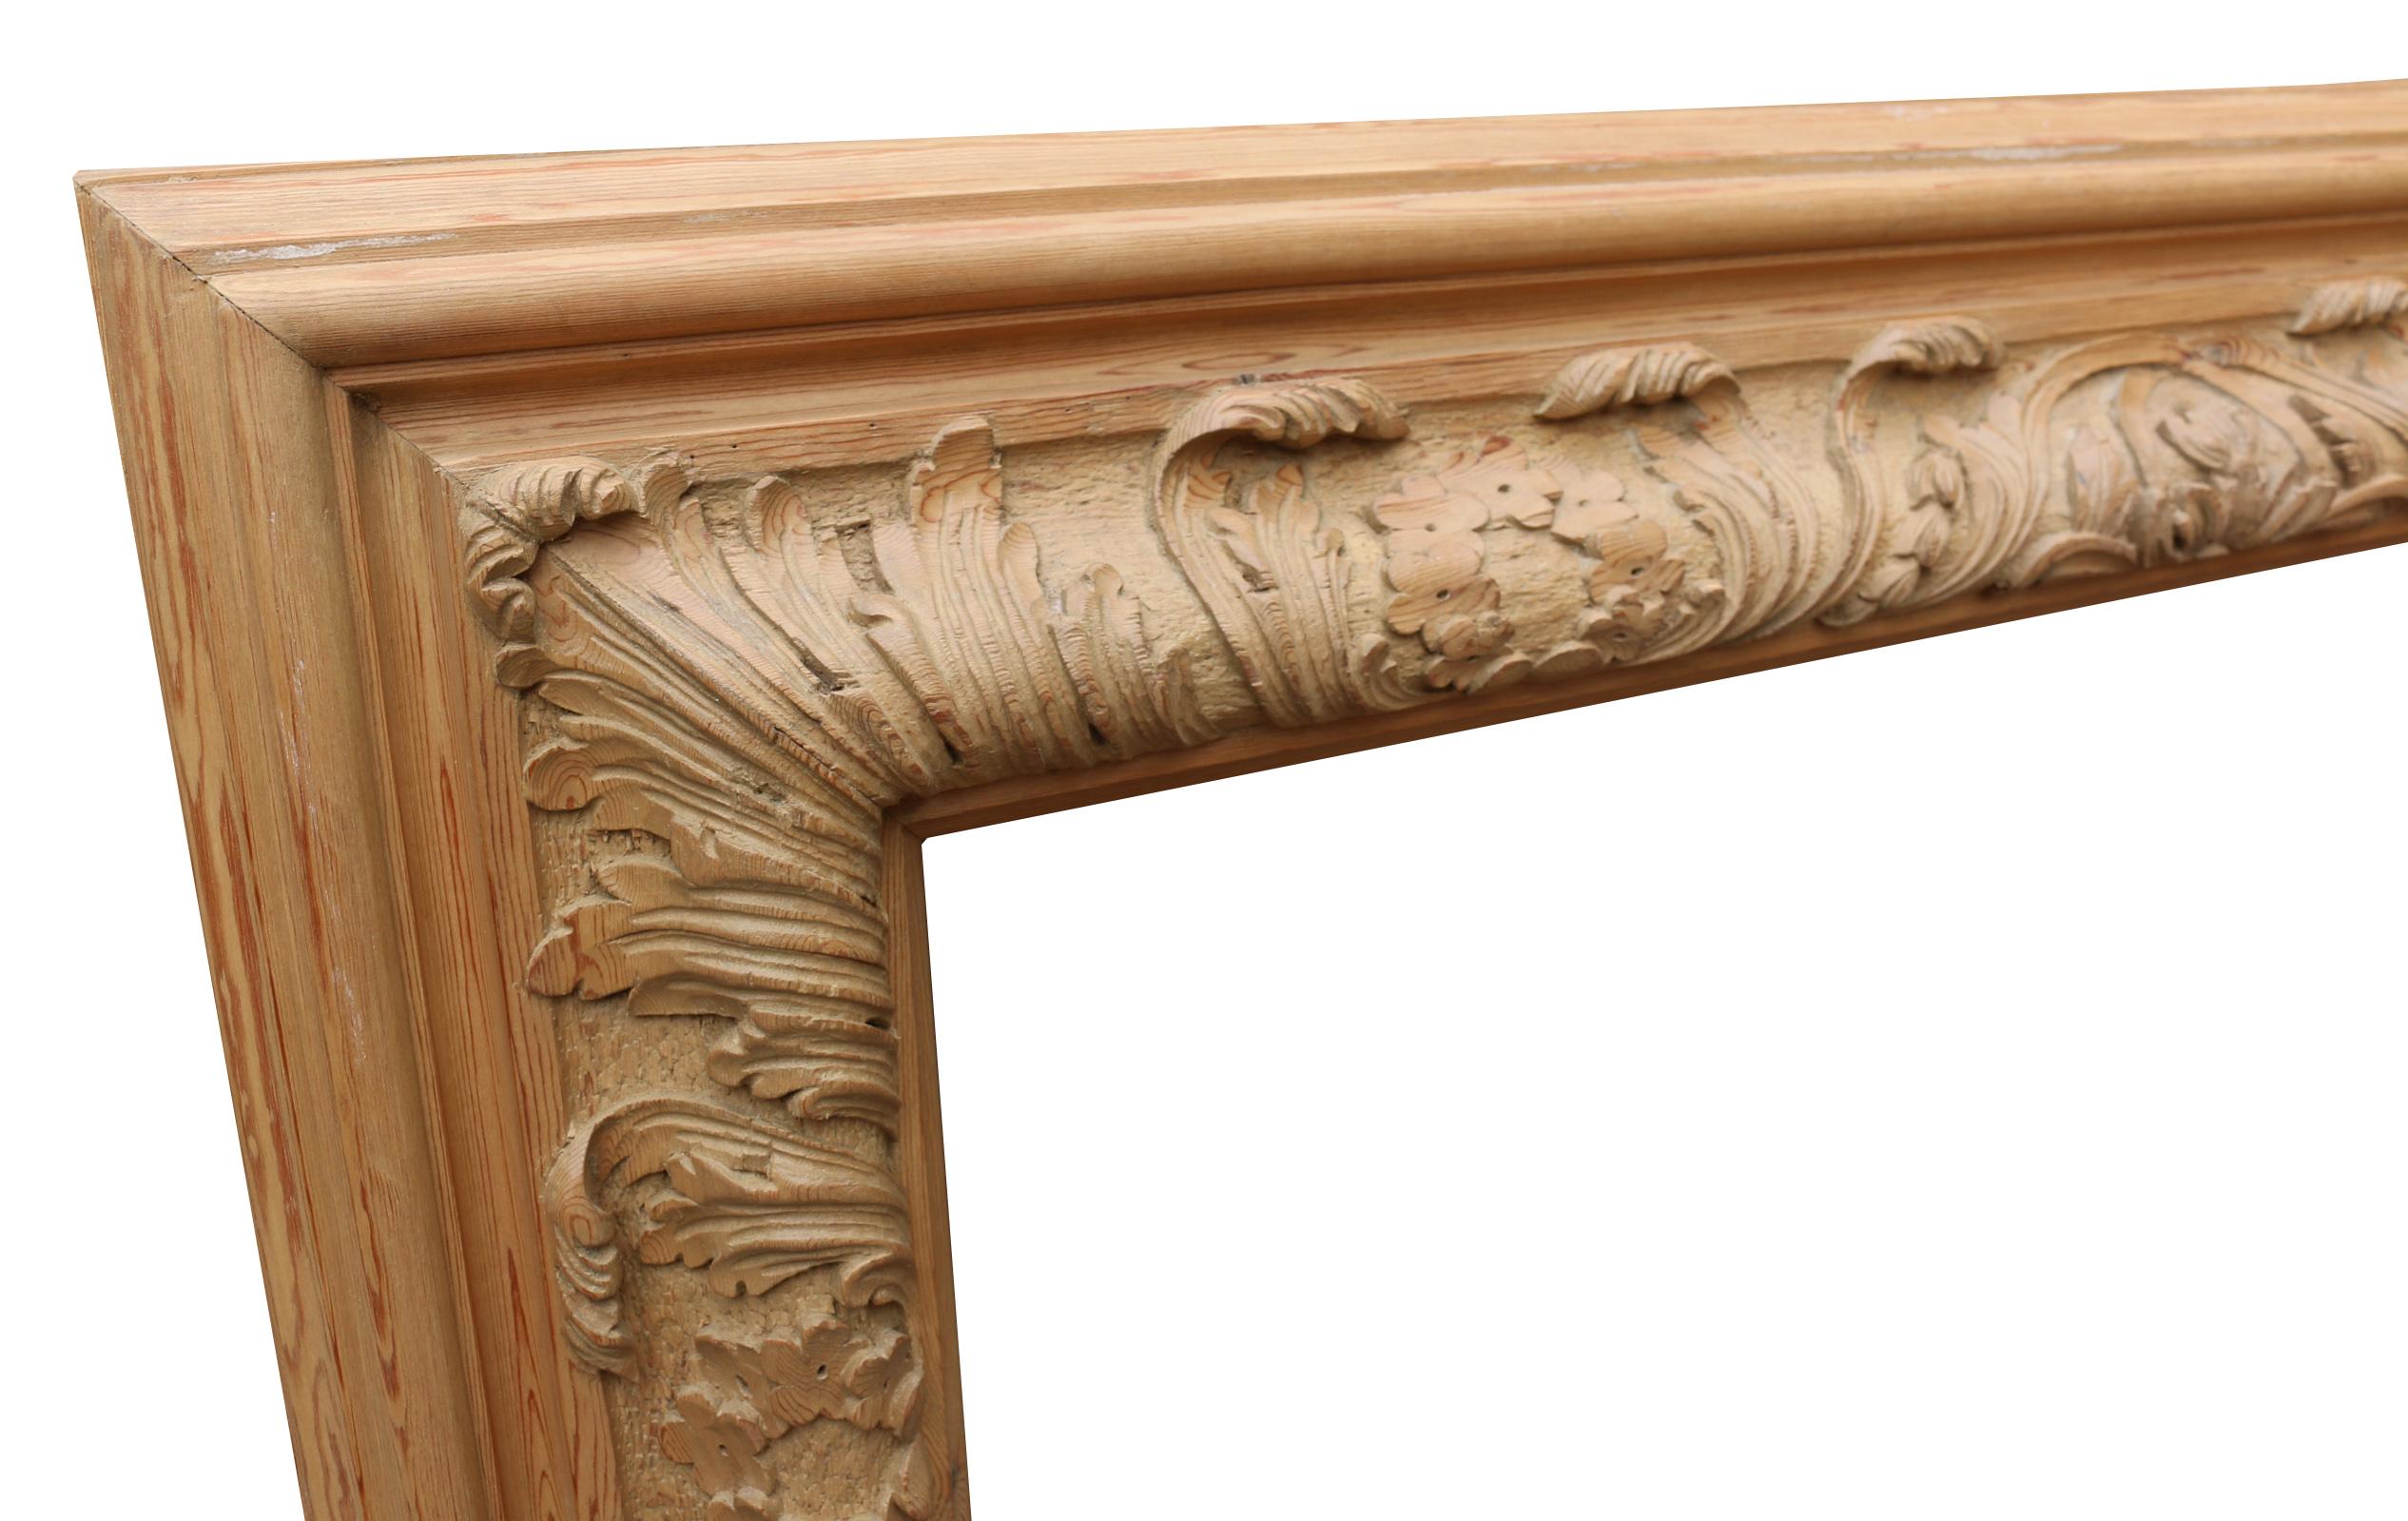 English Antique Carved Pine Bolection Fire Surround